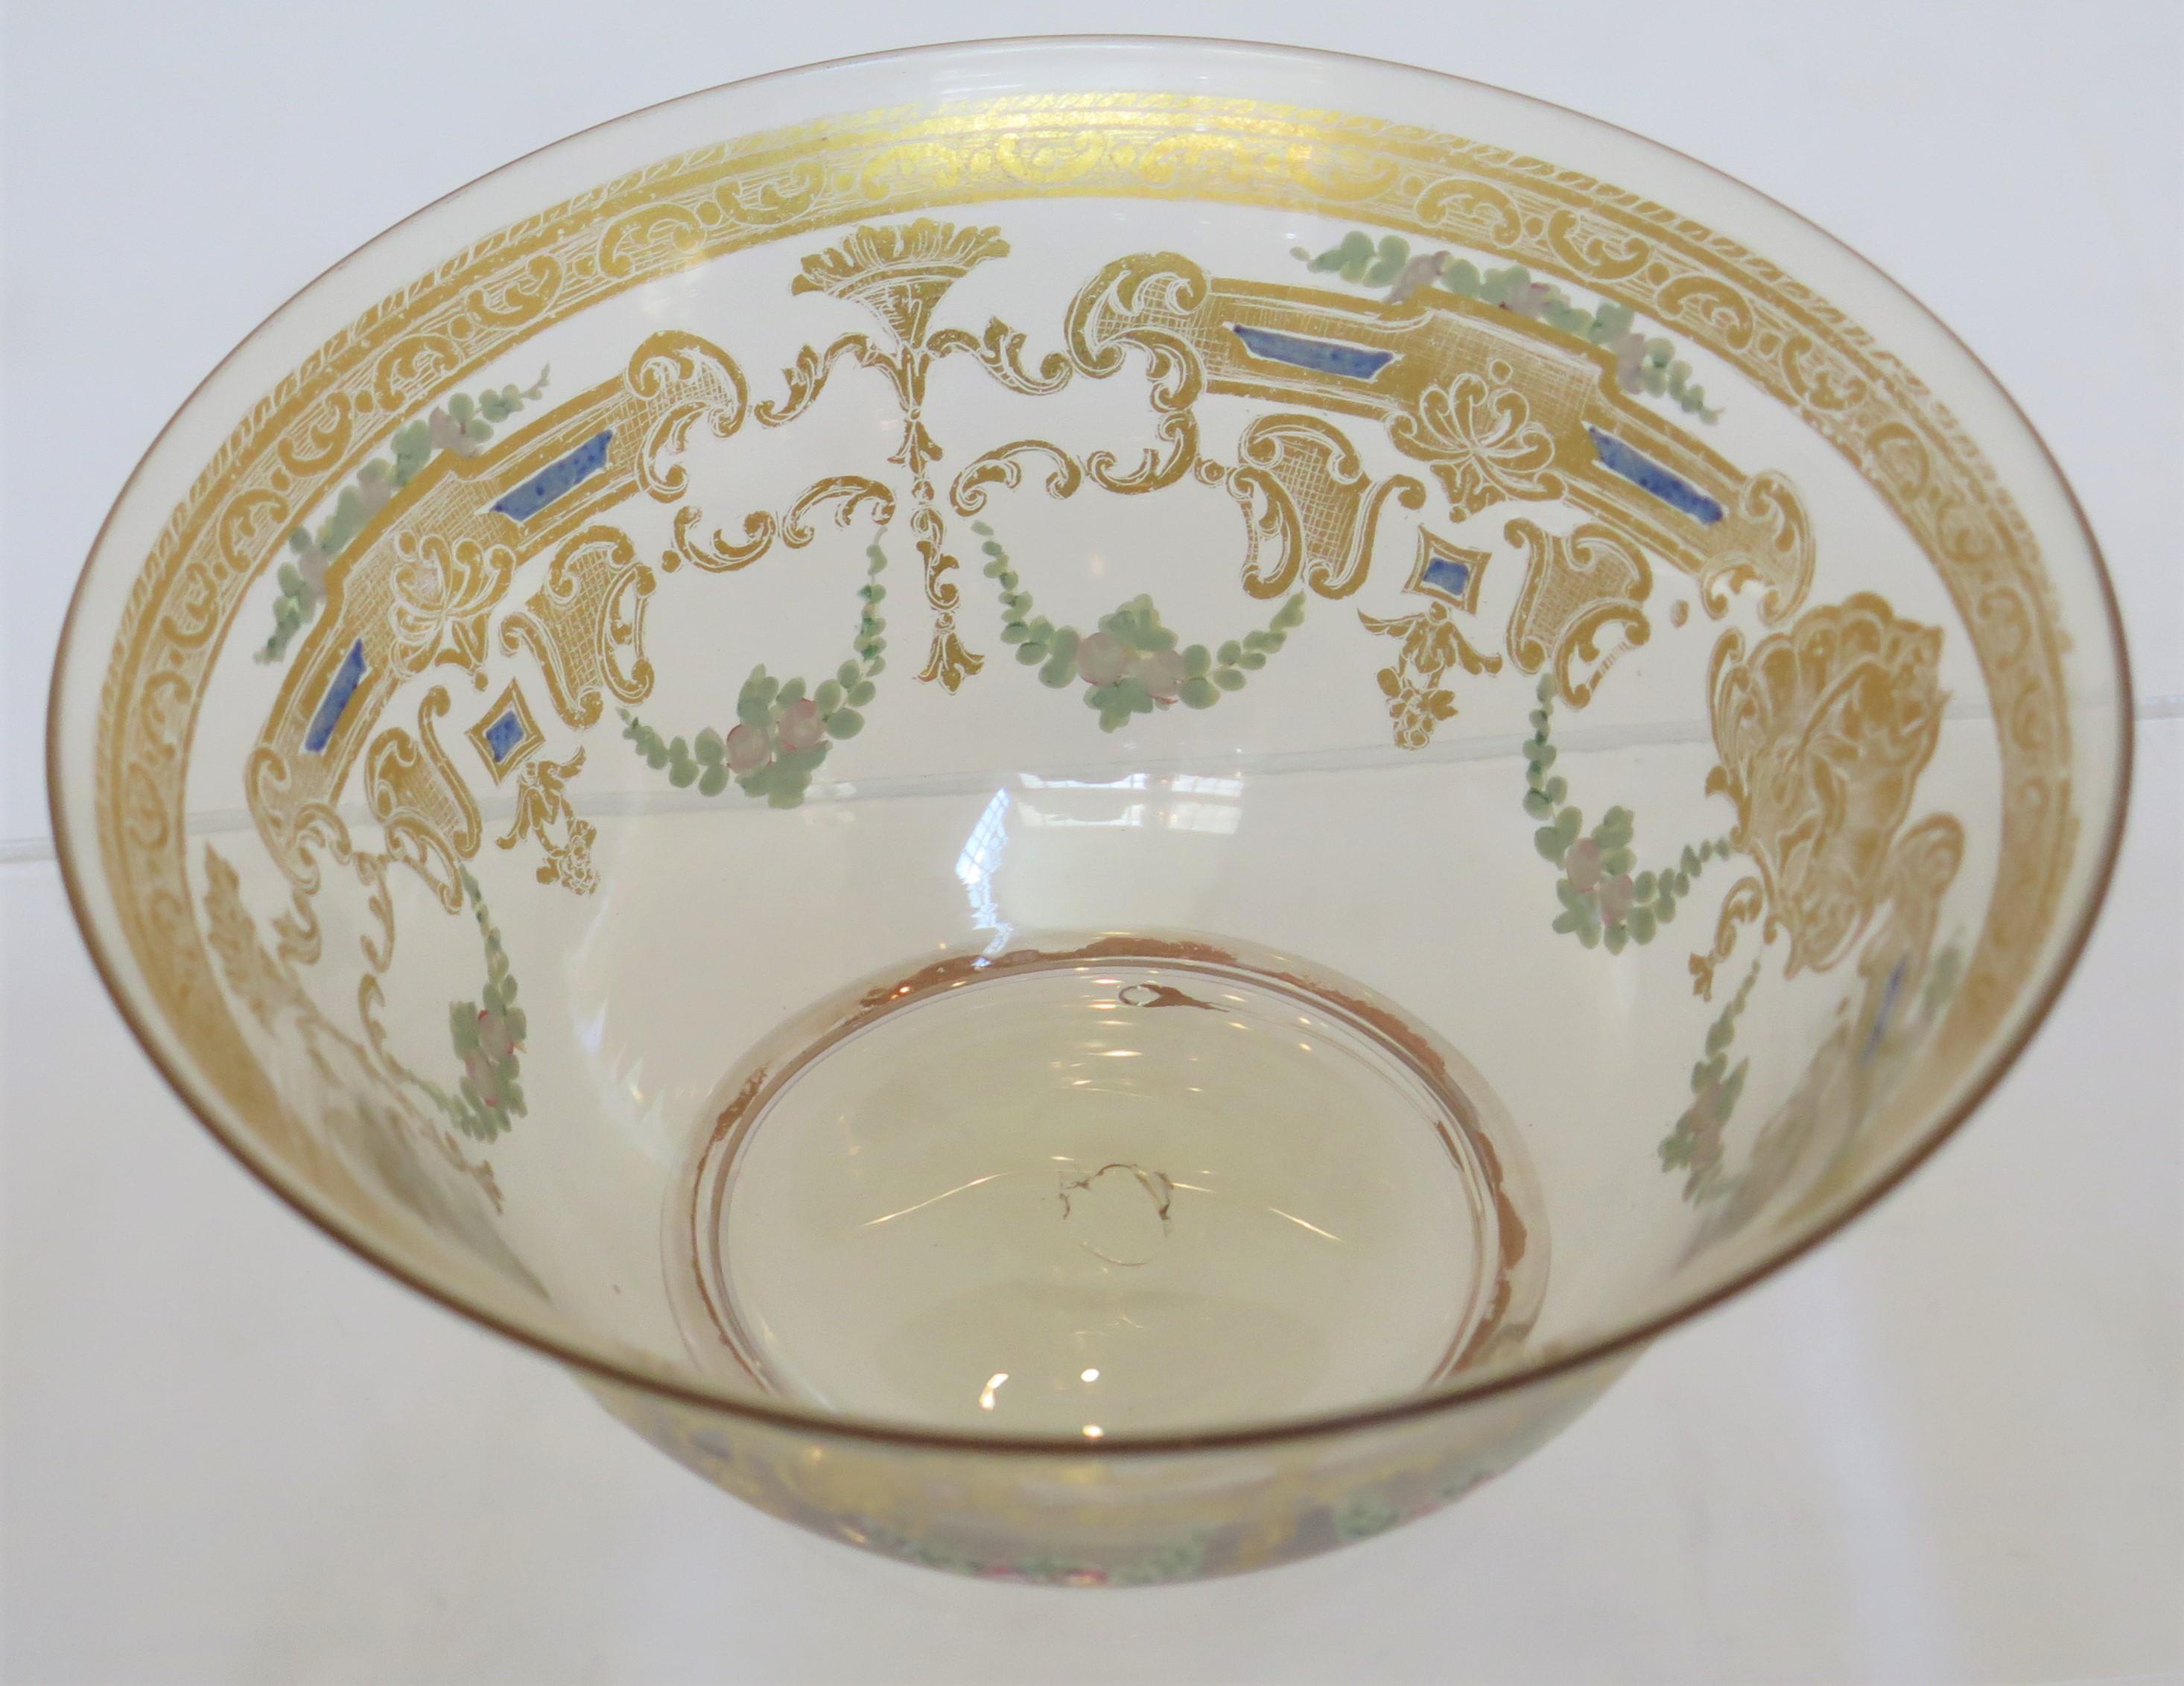 45 Group of Venetian Murano Glass Stemware with Gilt and Hand-Painted Decoration For Sale 1